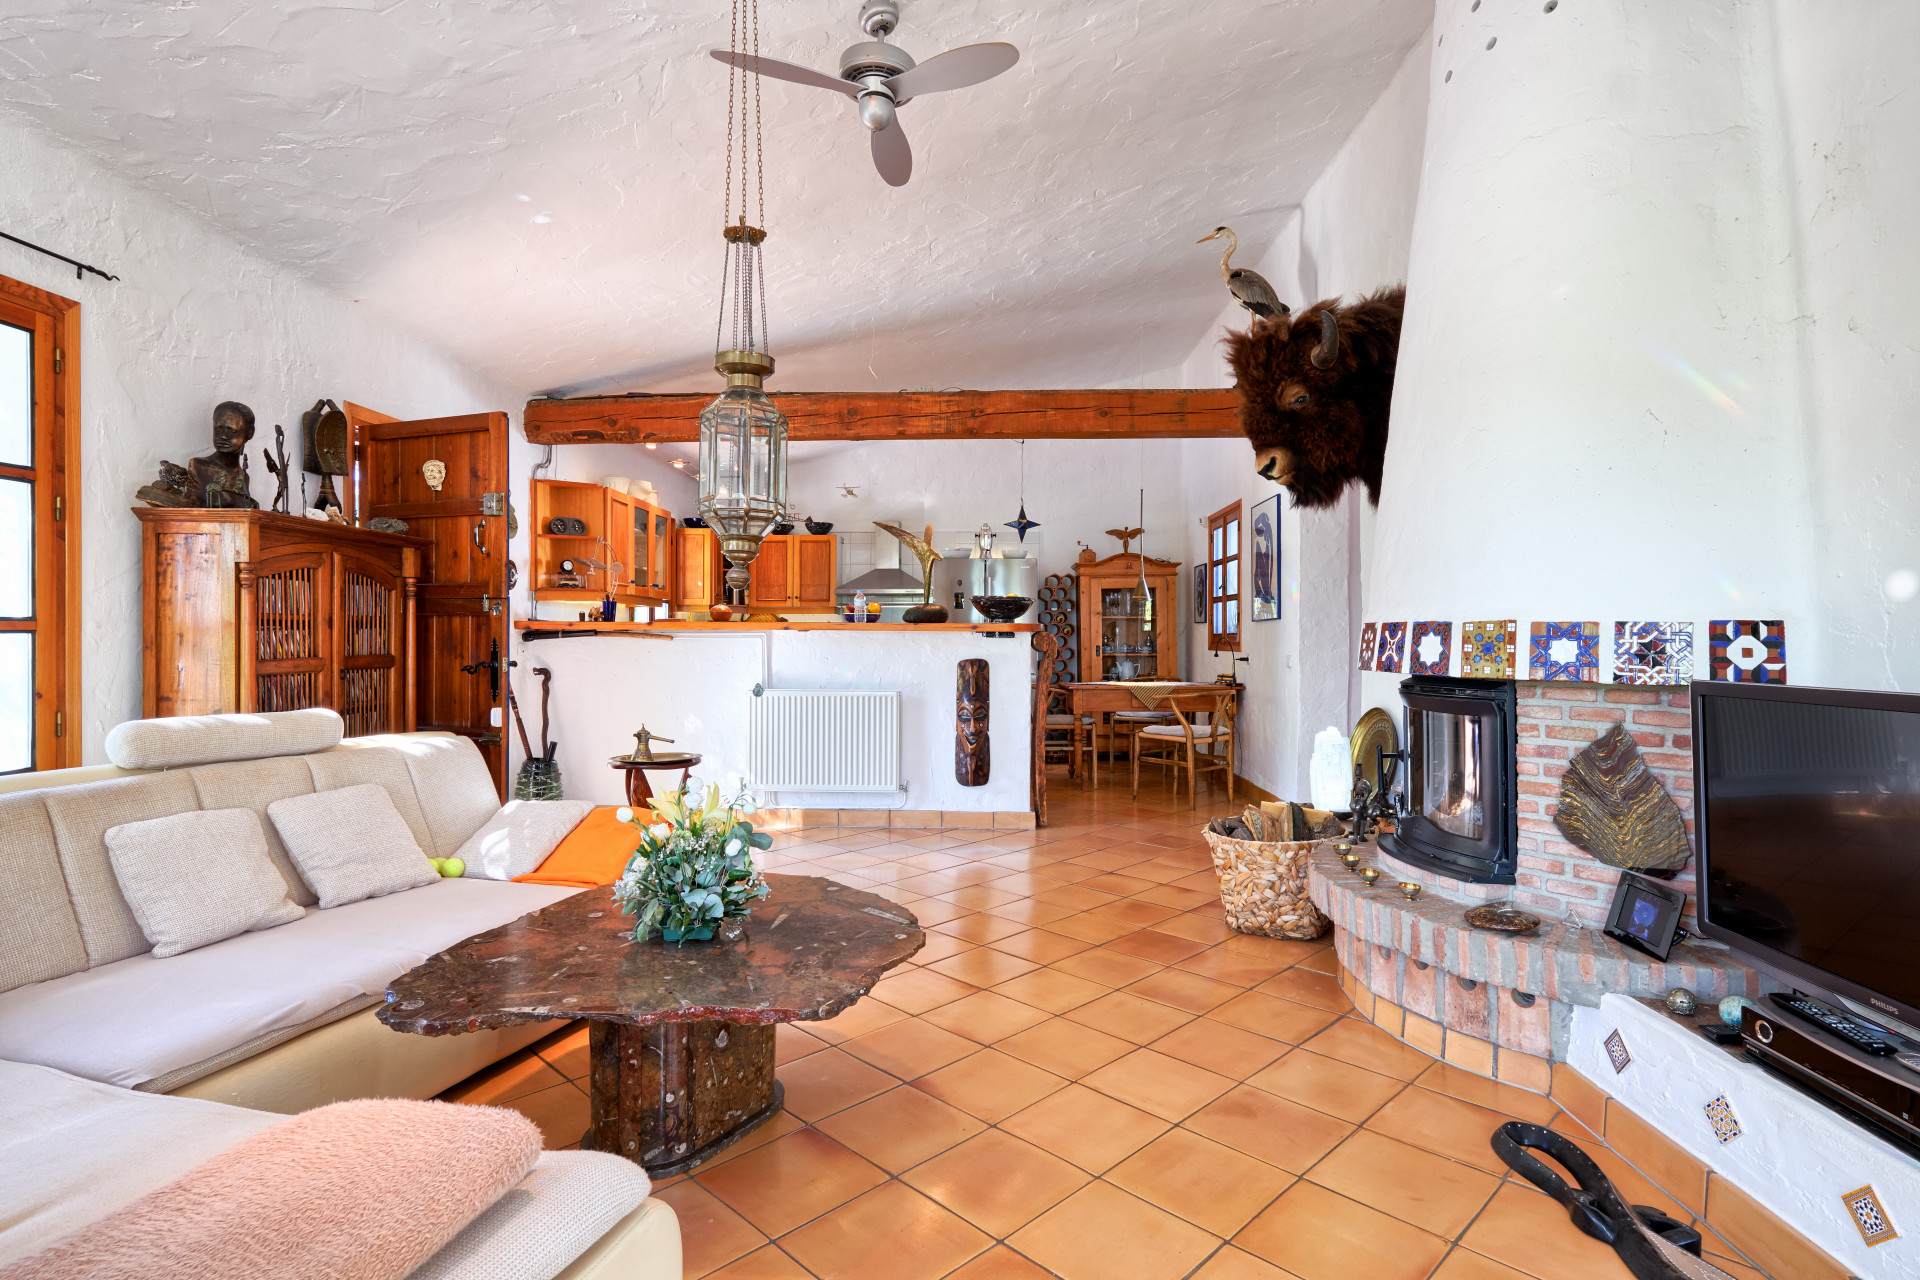 Beautiful finca situated in Los Reales, close to Estepona.